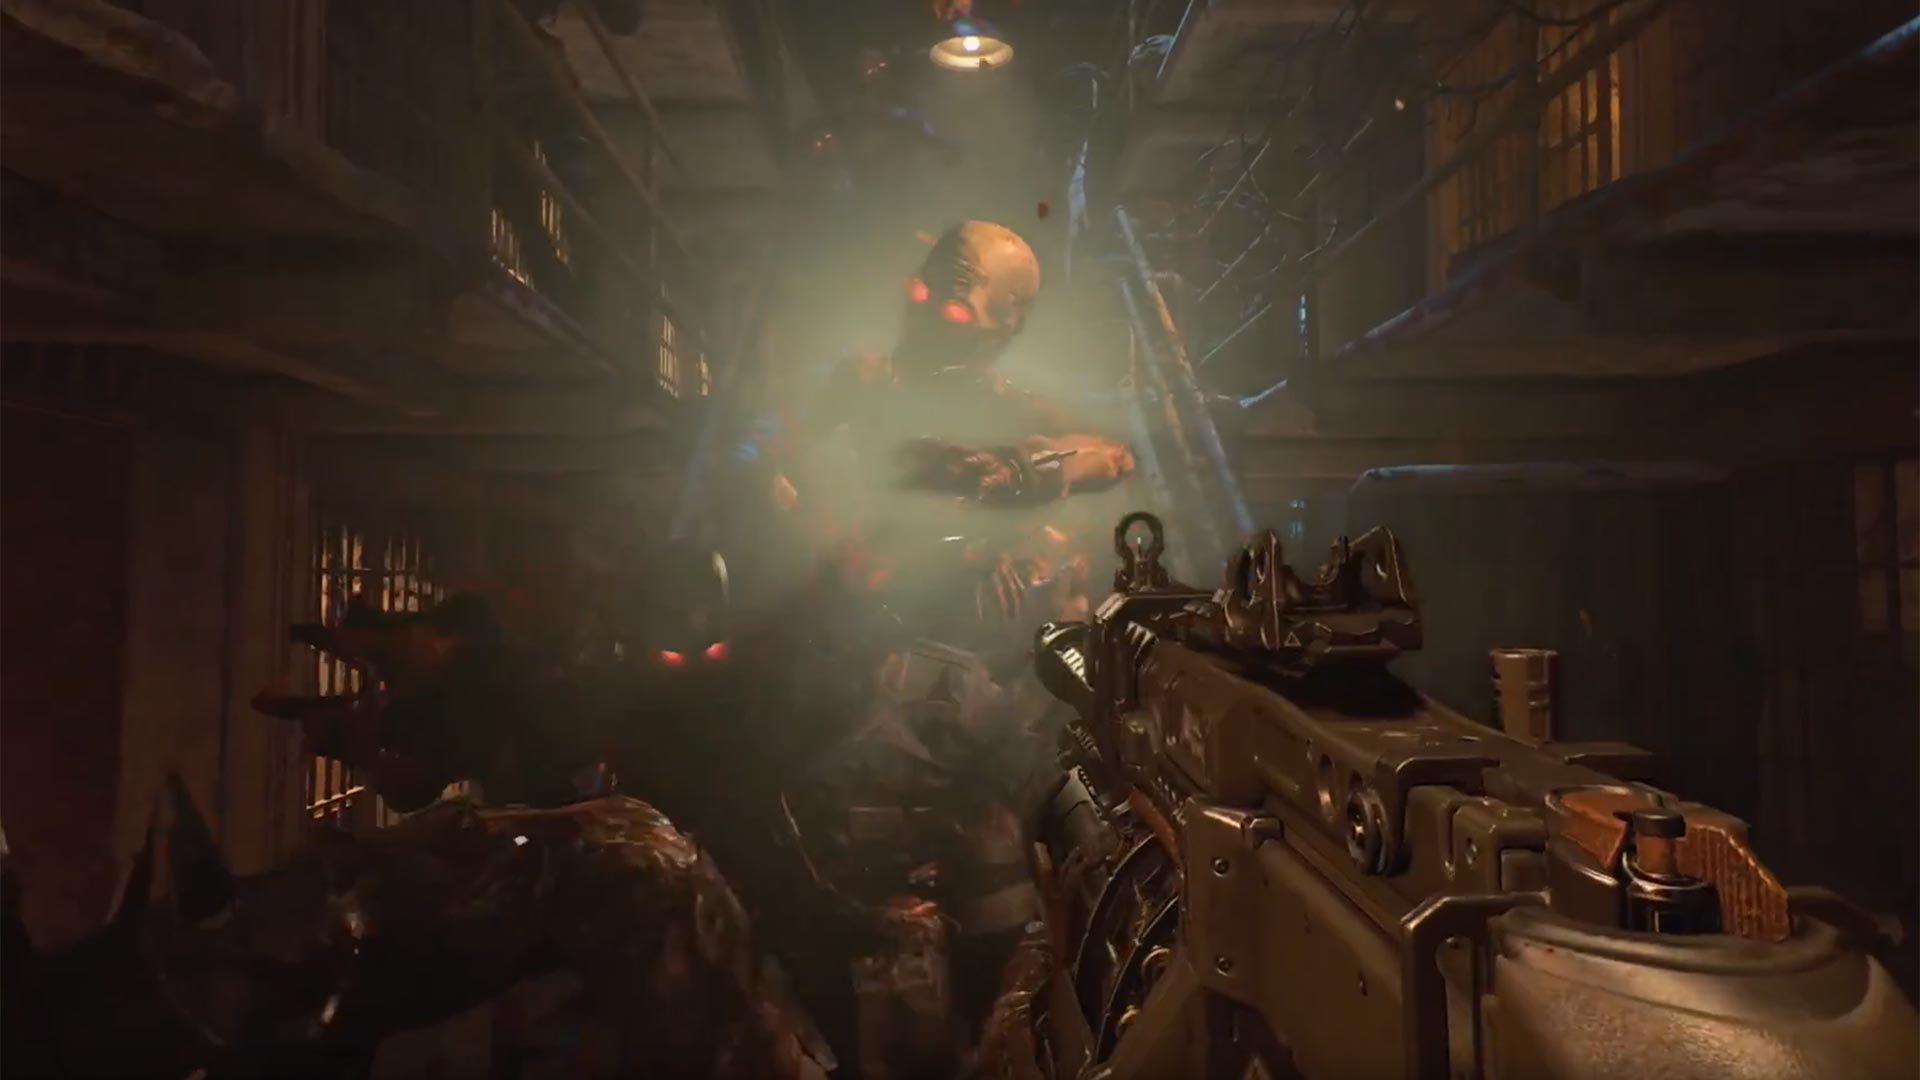 Call of Duty: Black Ops 4 – Zombies Details